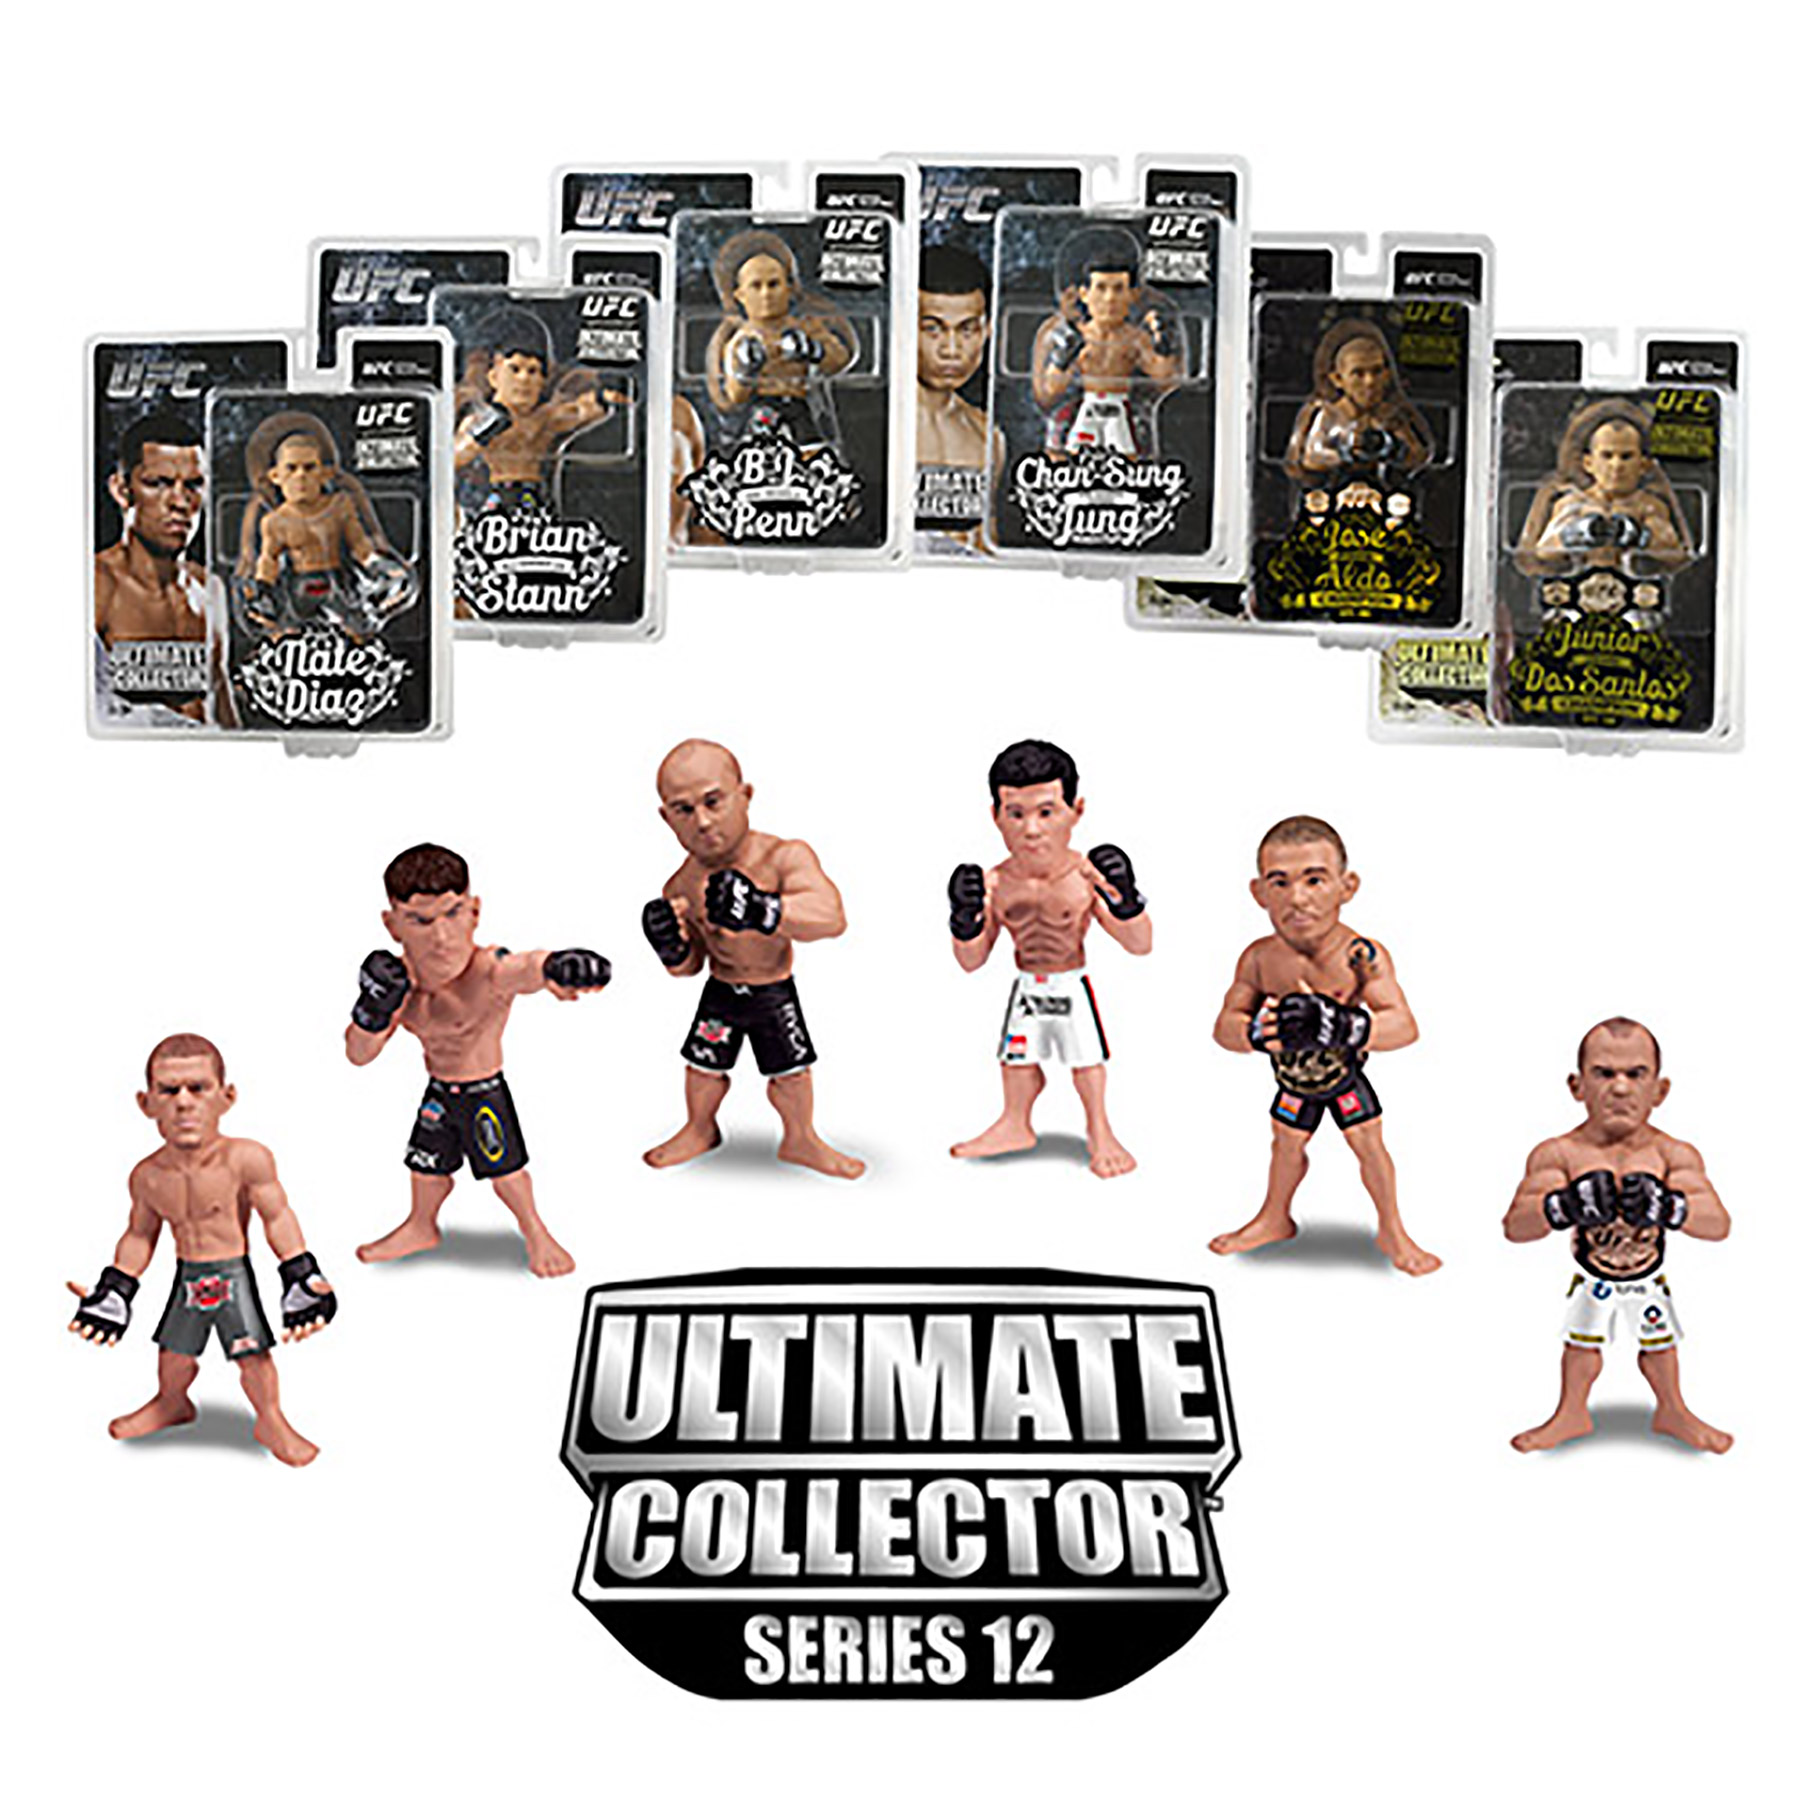 Toy - UFC - Ultimate Collector - Series 12 - 6 Pack (1 each of Nate Diaz, B...